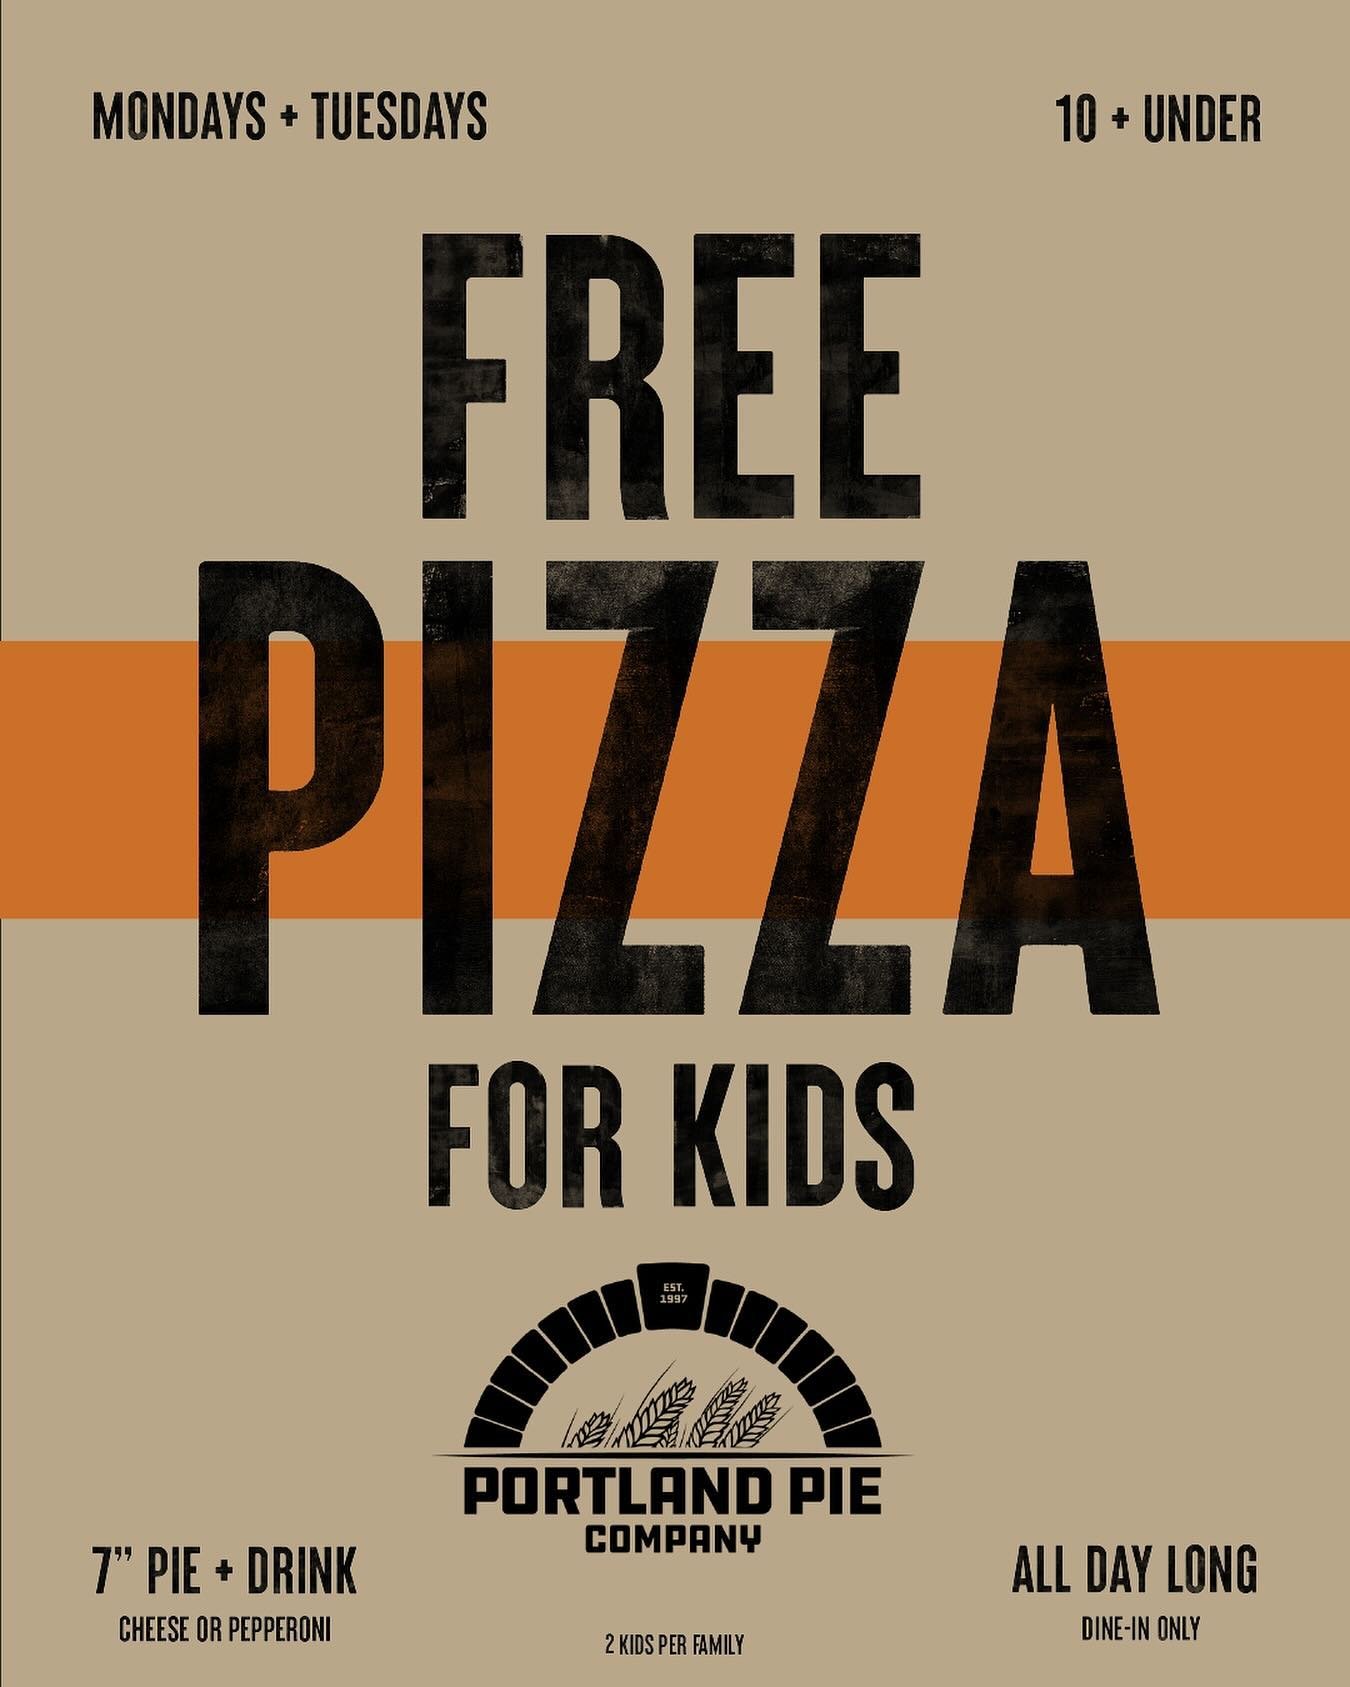 Easy way to start the week.

(with purchase of an adult meal).

#portlandpieco #kidseatfree